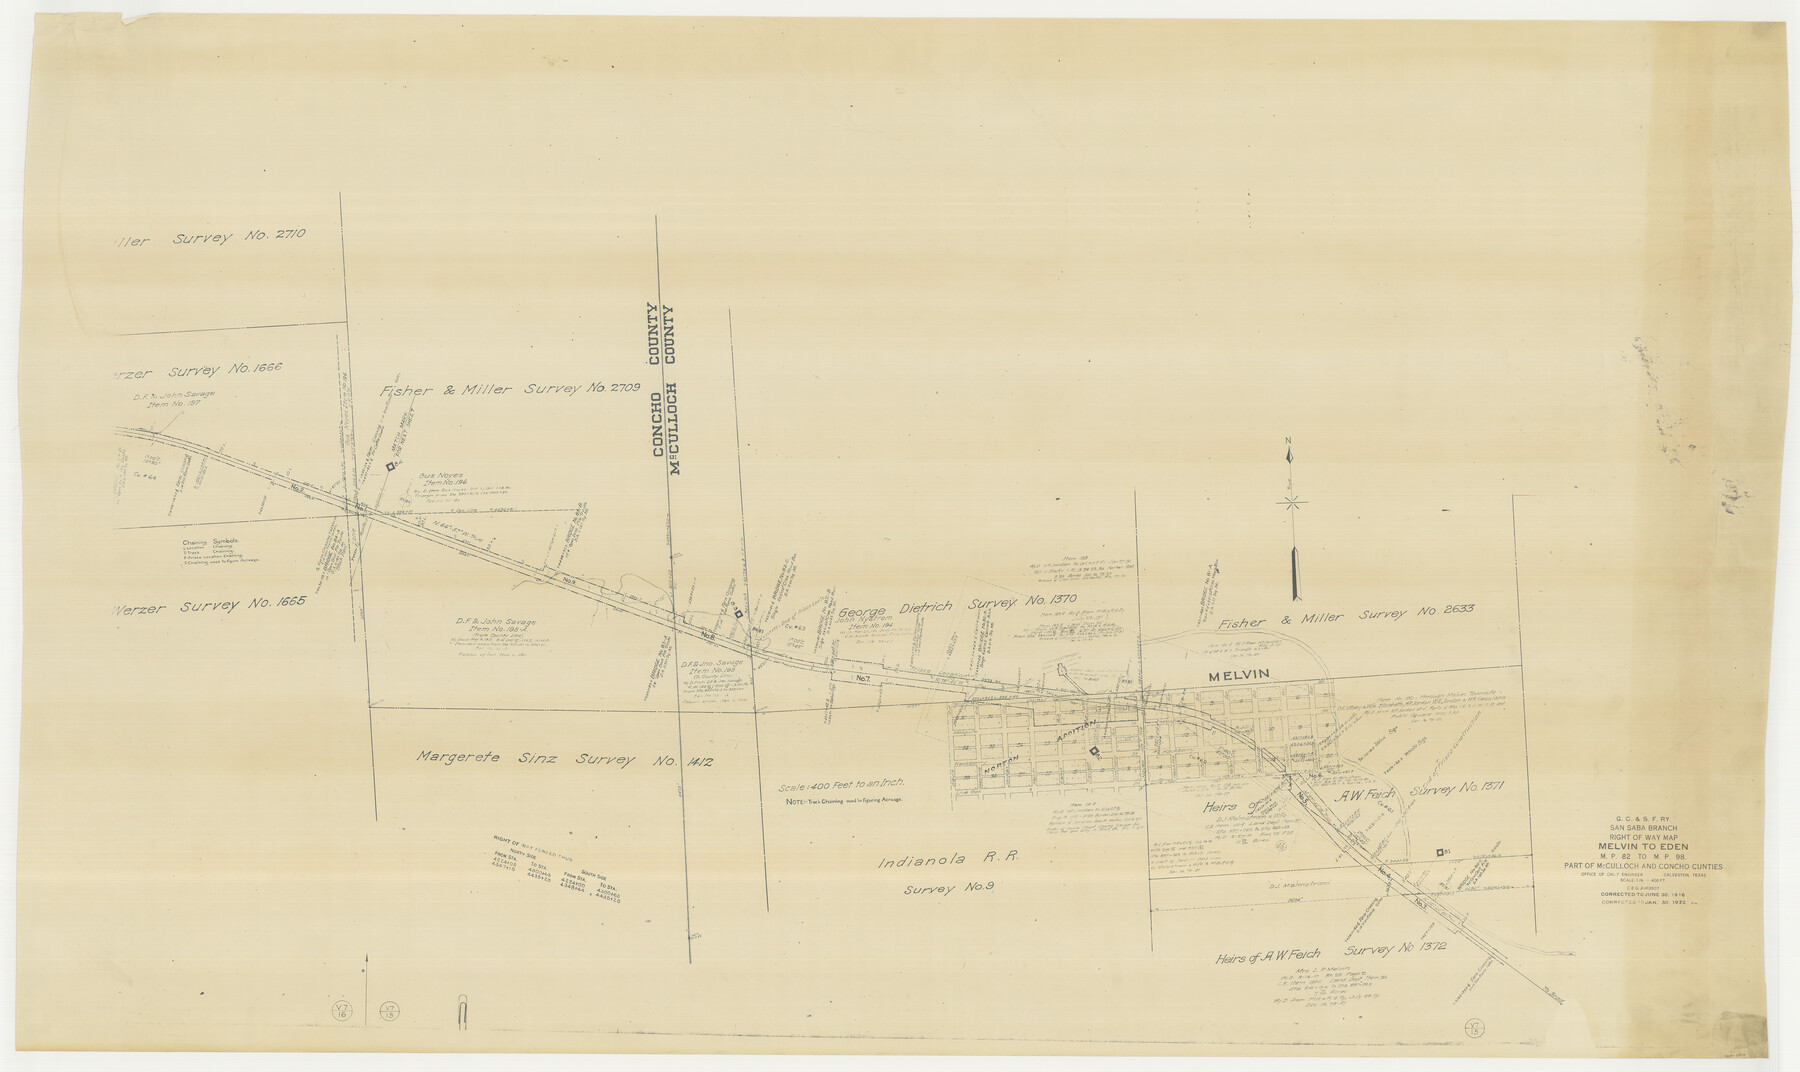 61417, G. C. & S. F. Ry., San Saba Branch Right of Way Map, Melvin to Eden, General Map Collection